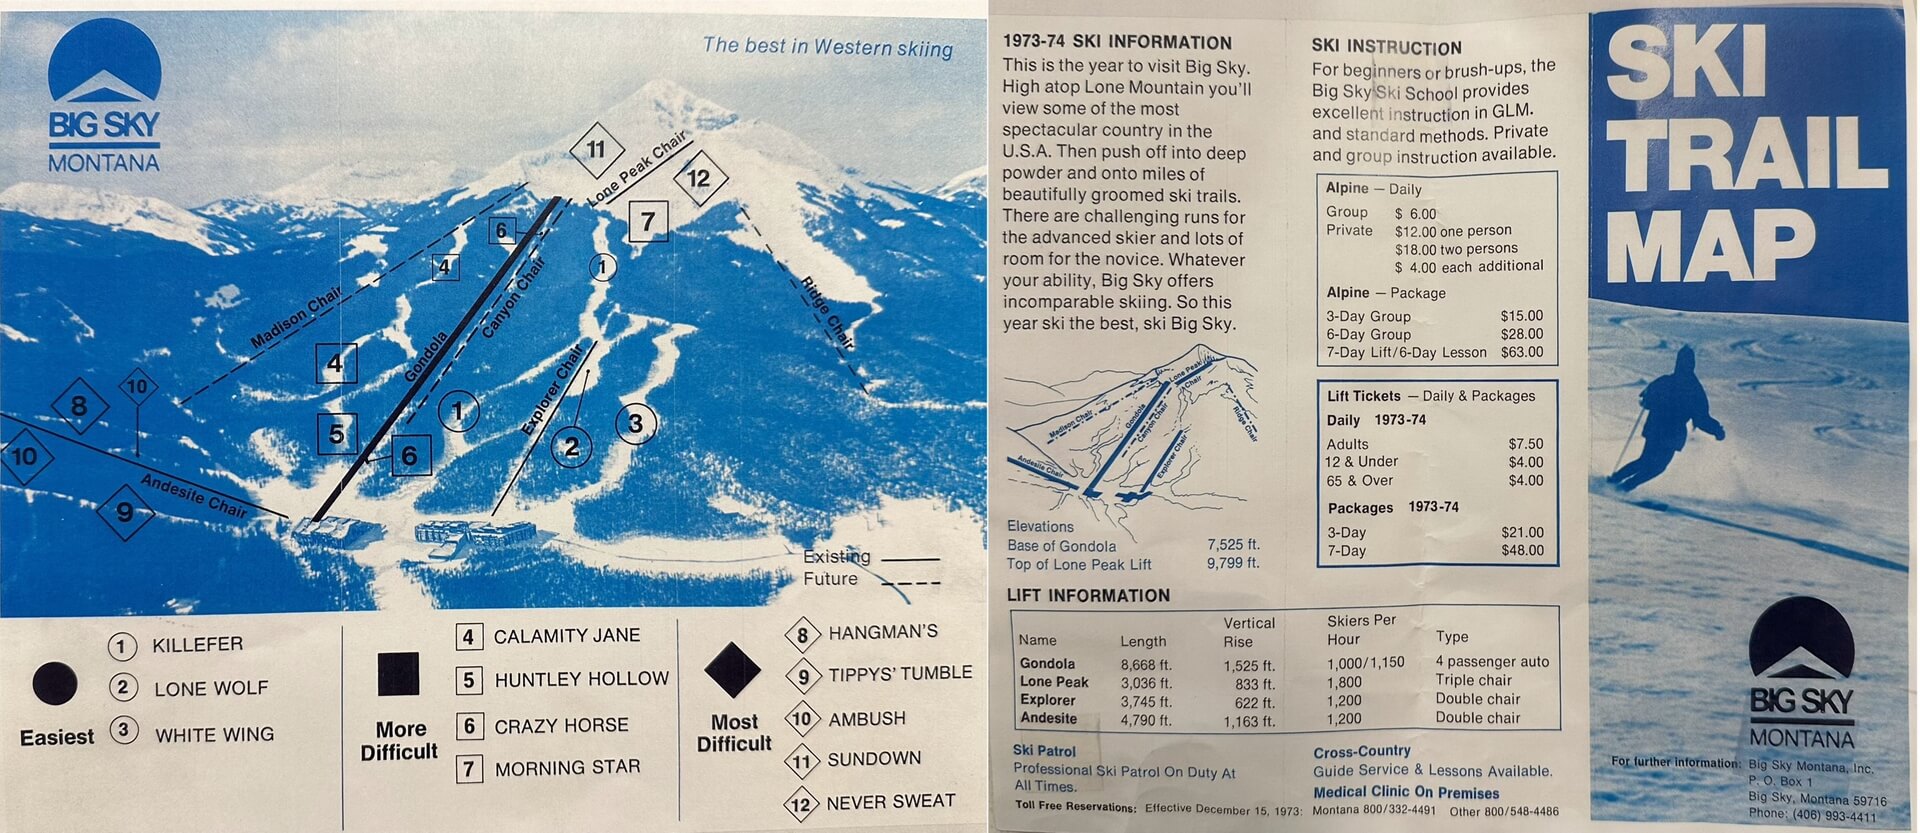 Big Sky Trail Map from 1973